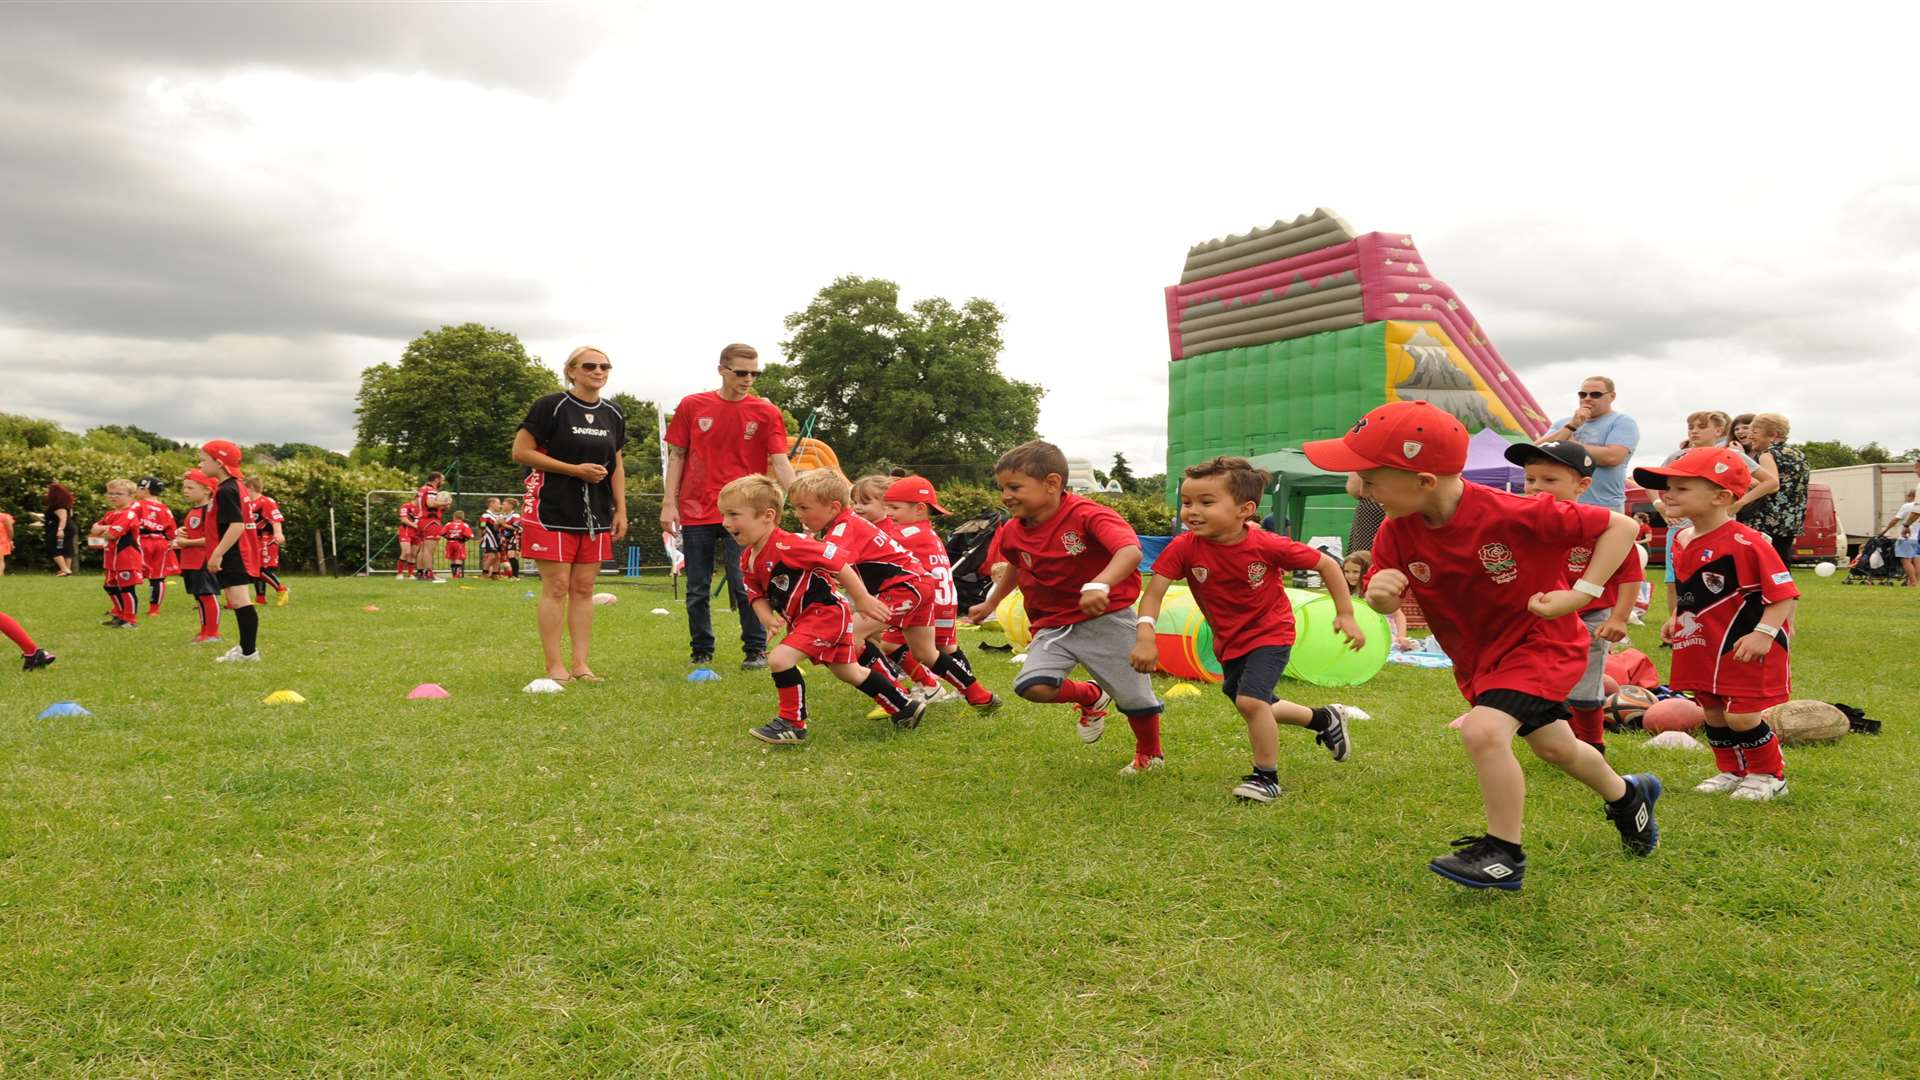 There will be kids and sports activities at the Dartford Festival in Central Park Picture: Steve Crispe